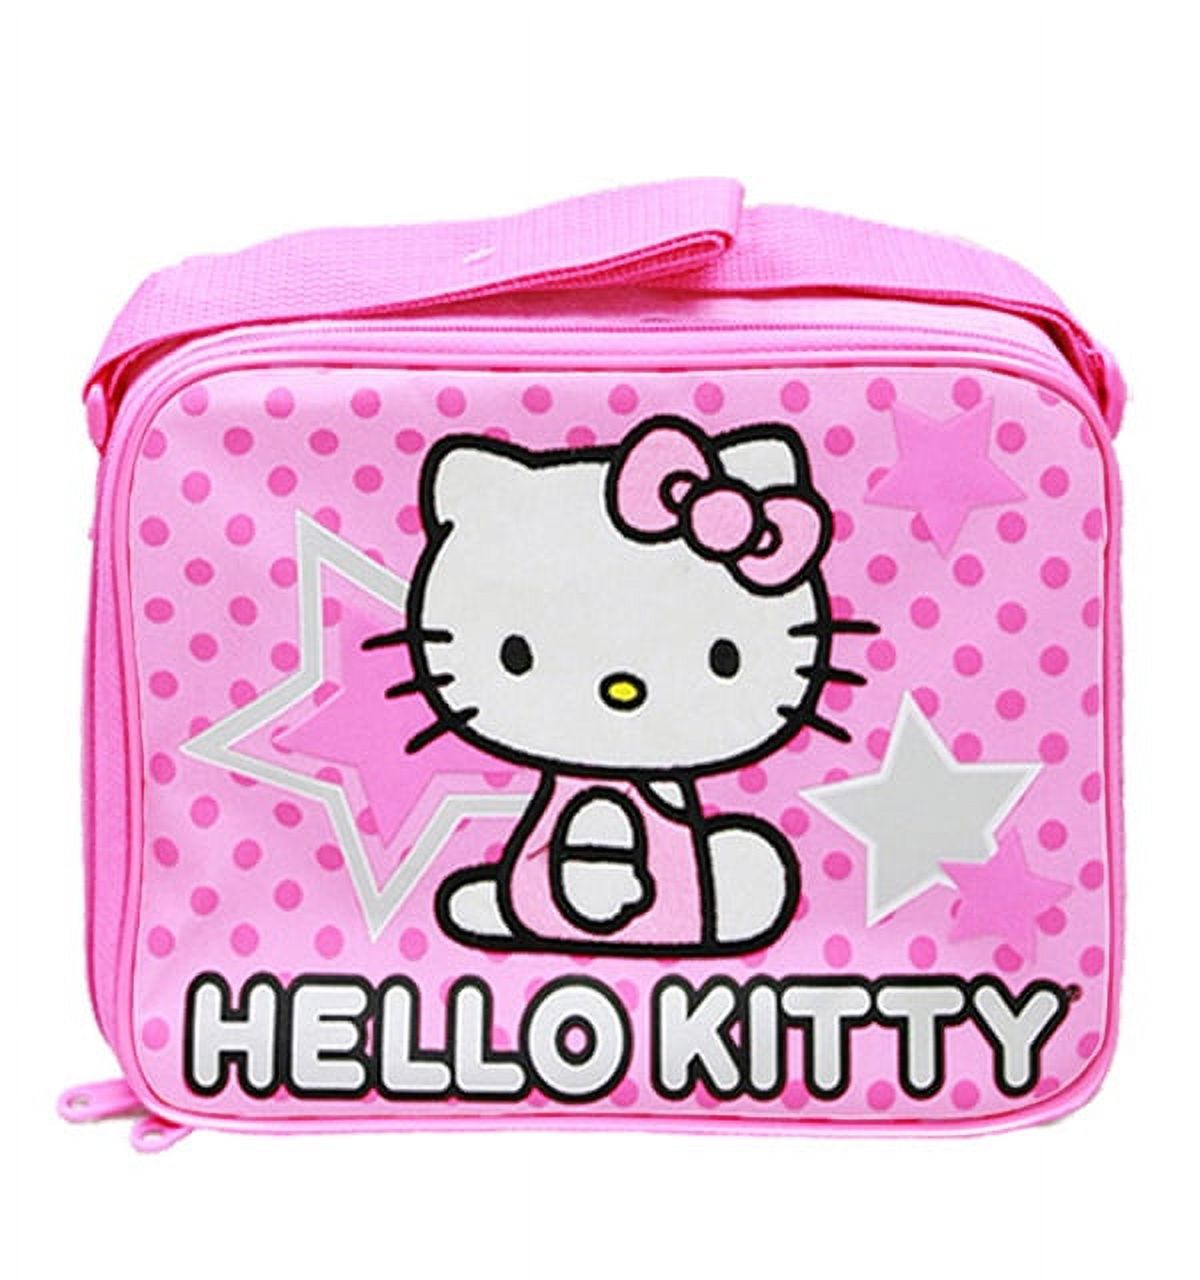 Lunch Bag - Hello Kitty - Pink Star and Dots New Case Girls Gifts Licensed 81401 - image 1 of 4